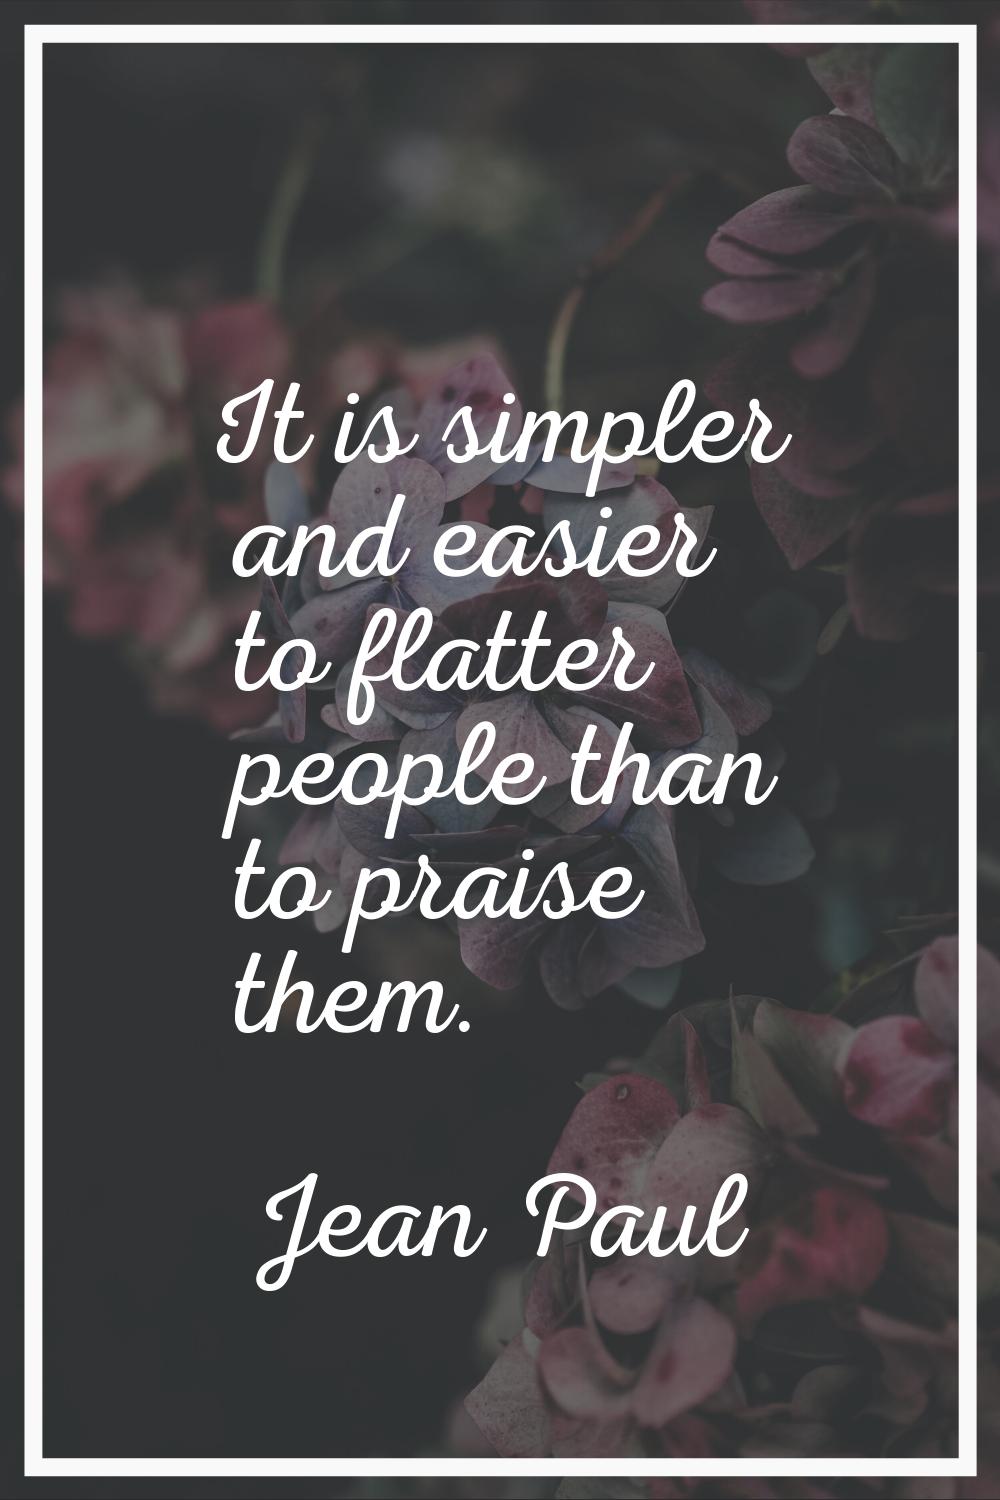 It is simpler and easier to flatter people than to praise them.